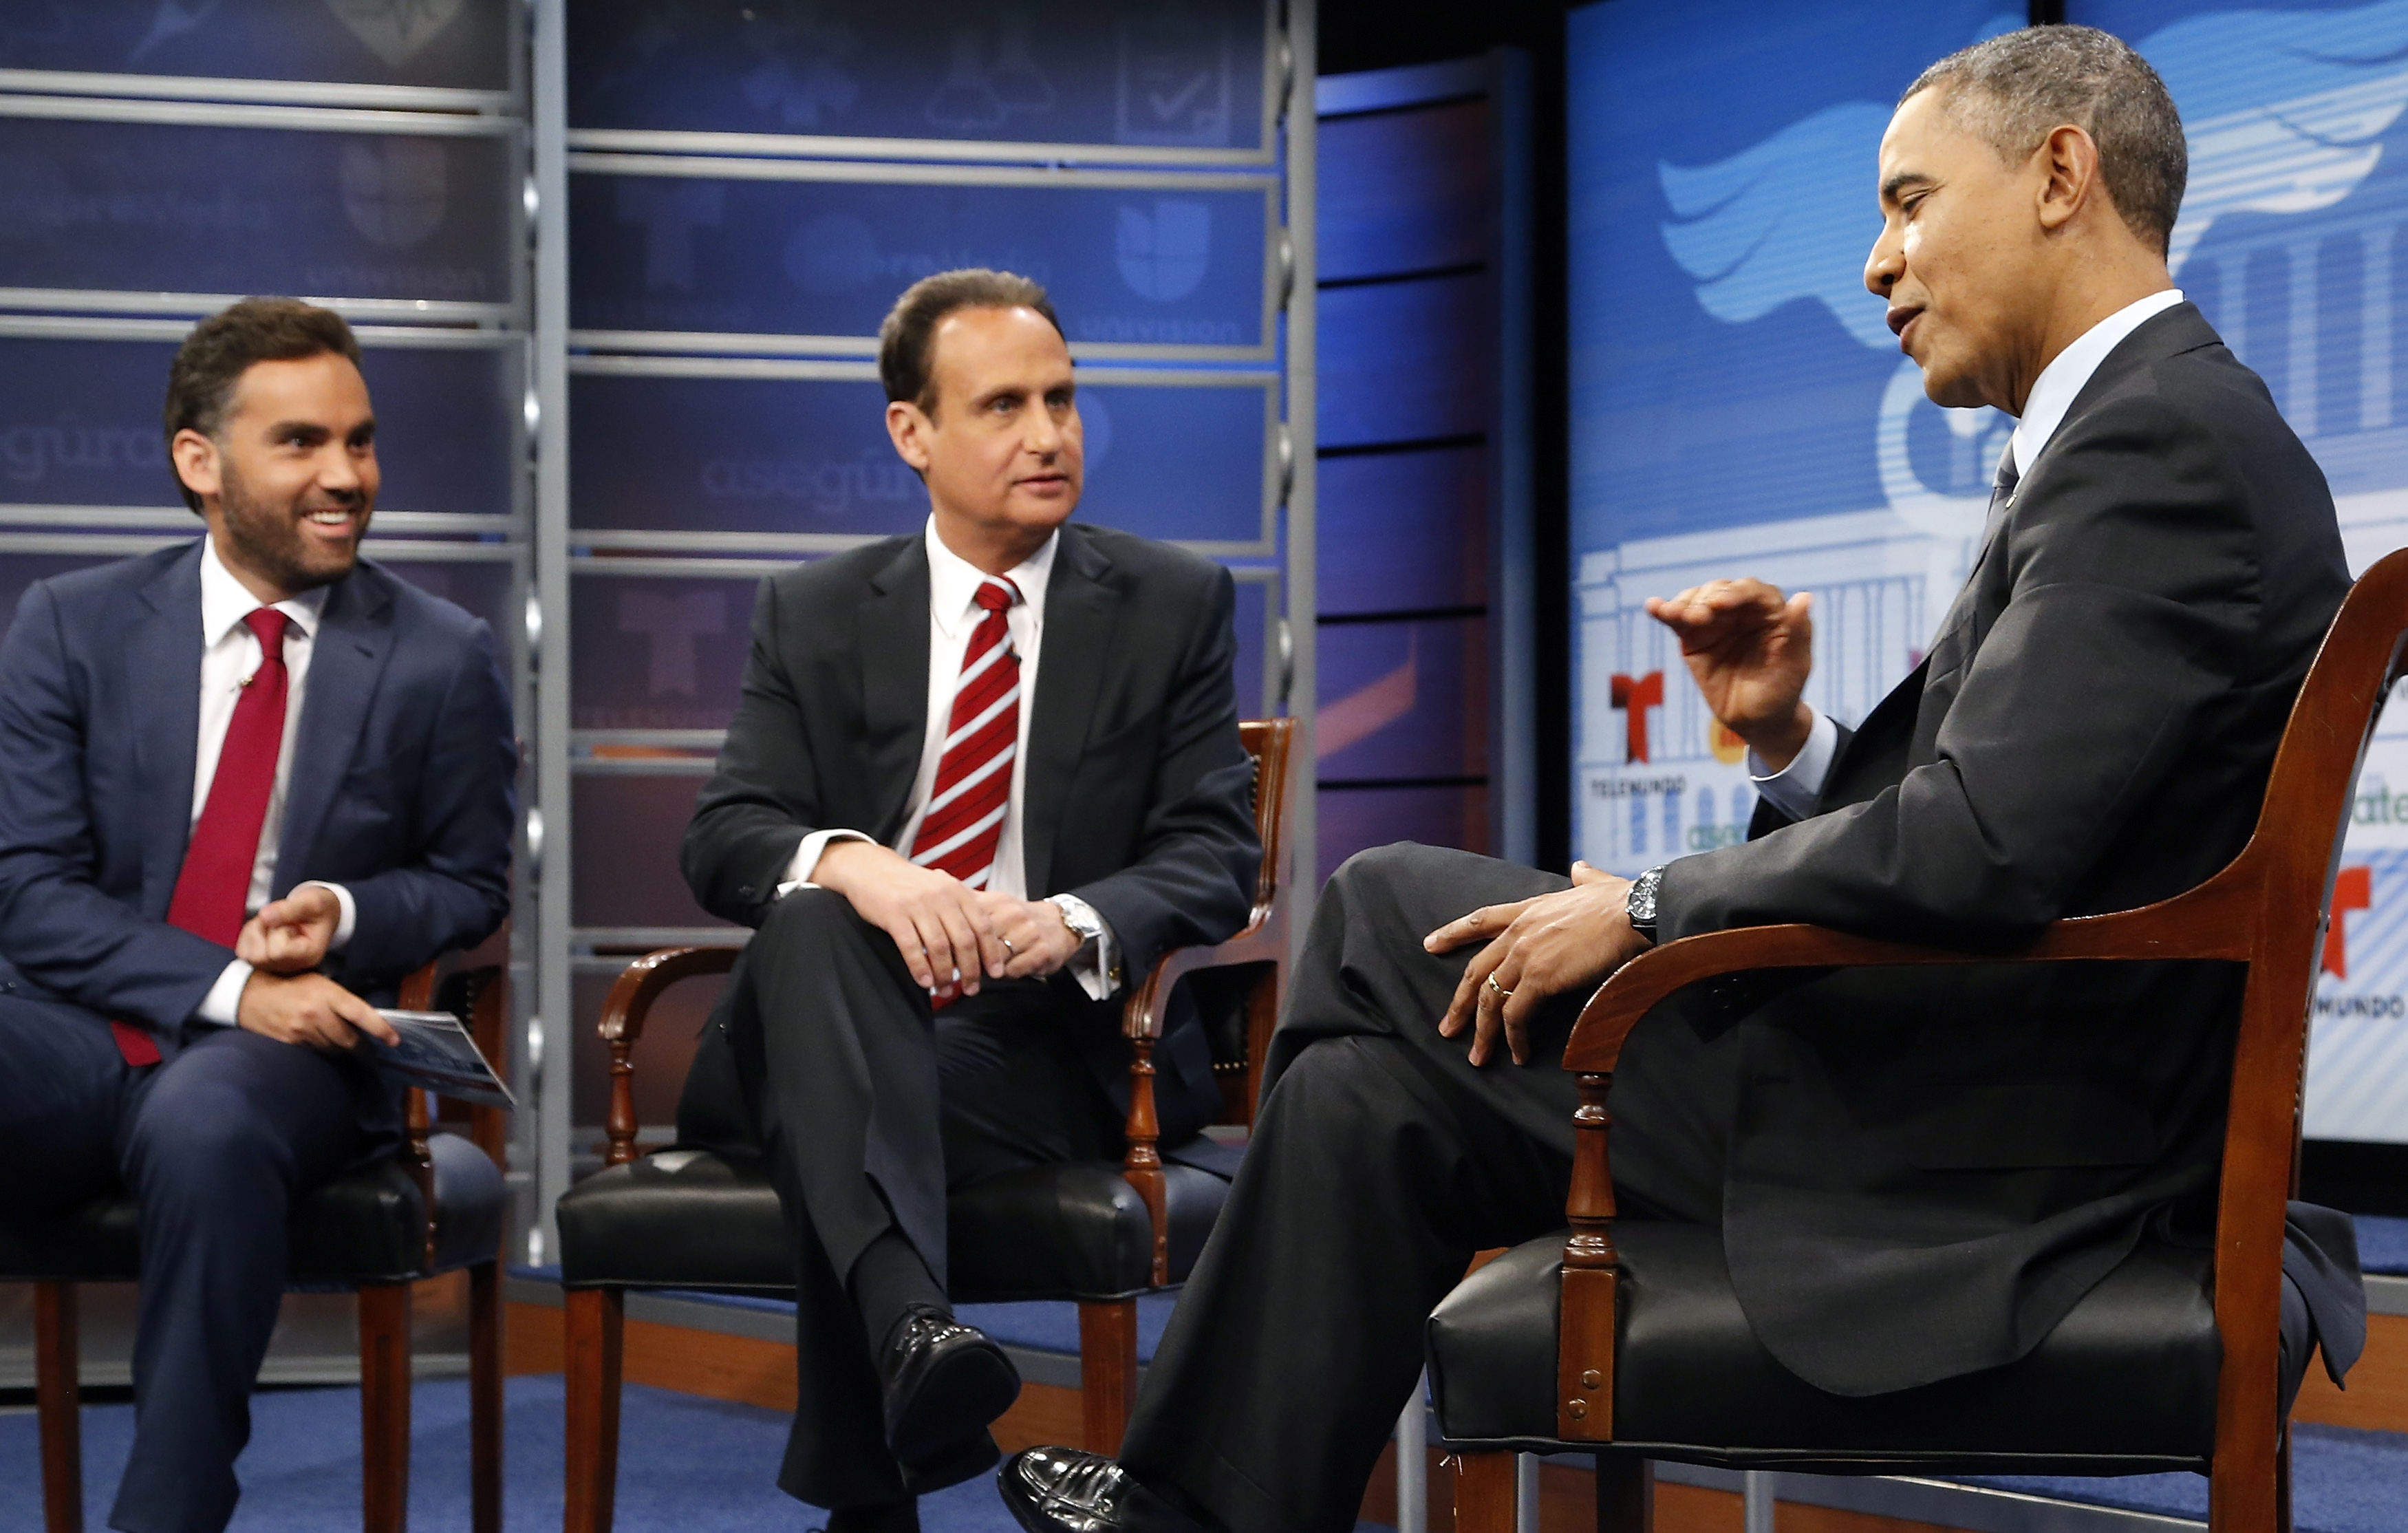 President Barack Obama talks with moderators Enrique Acevedo of Univision and Jose Diaz Balart of Telemundo during a commercial break in a town hall-style television forum to encourage Latino Americans to enroll in Obamacare health insurance plans, at the Newseum in Washington March 6, 2014. (Jonathan Ernst—Reuters)